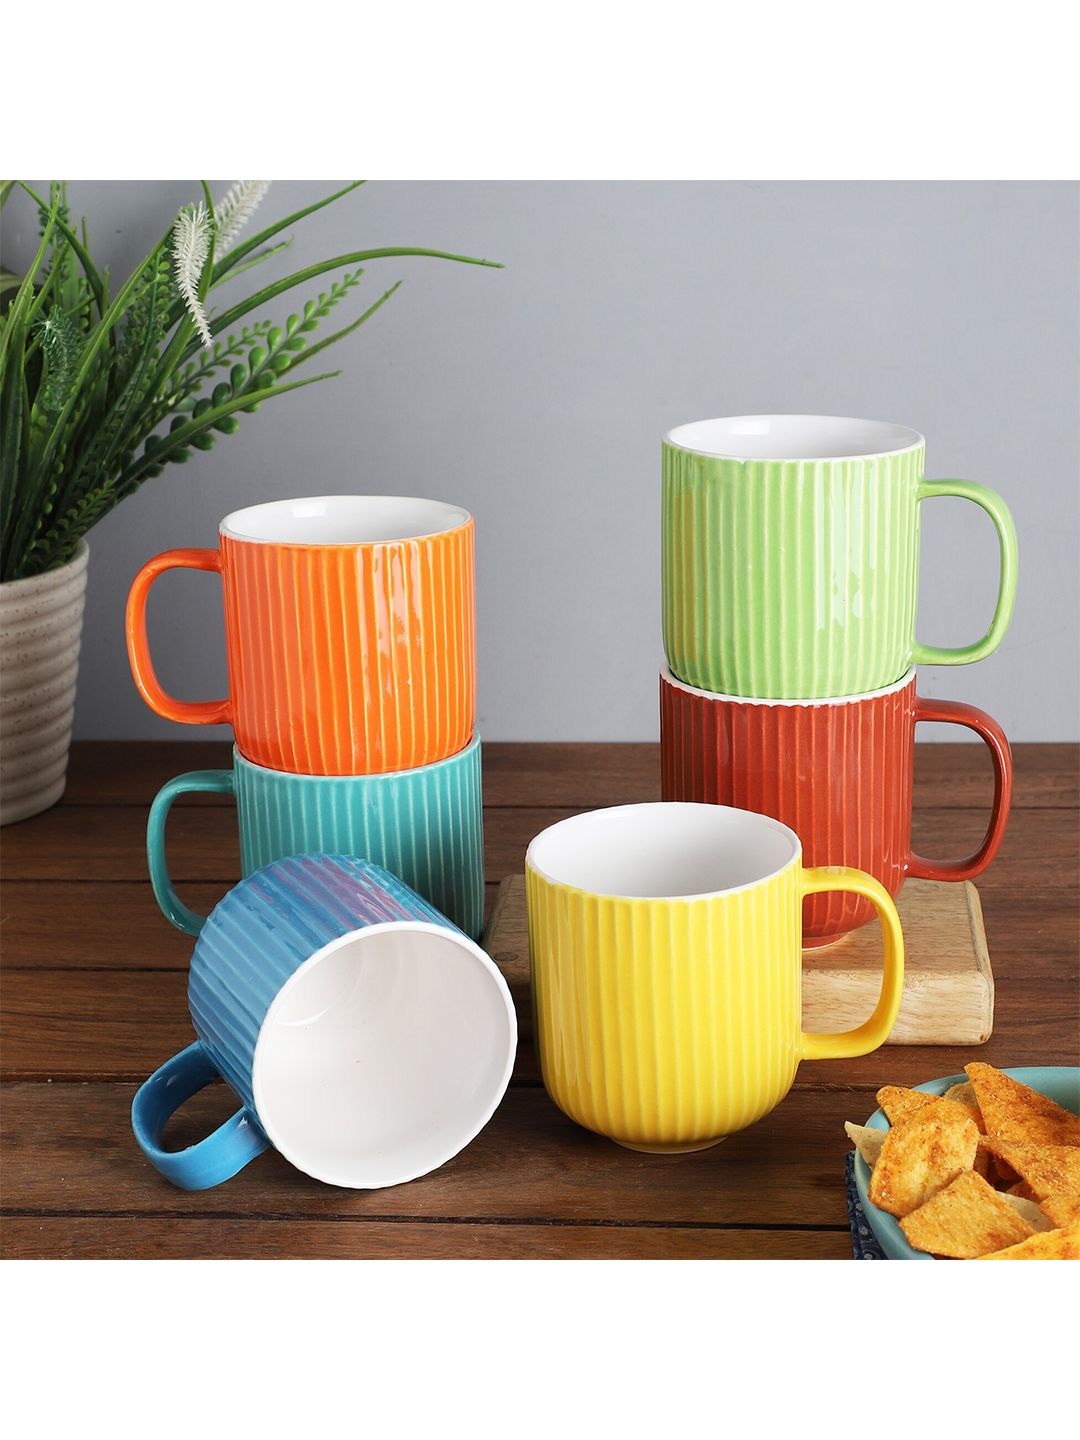 The Decor Mart Set of 6 Textured Ceramic Glossy Cups Price in India